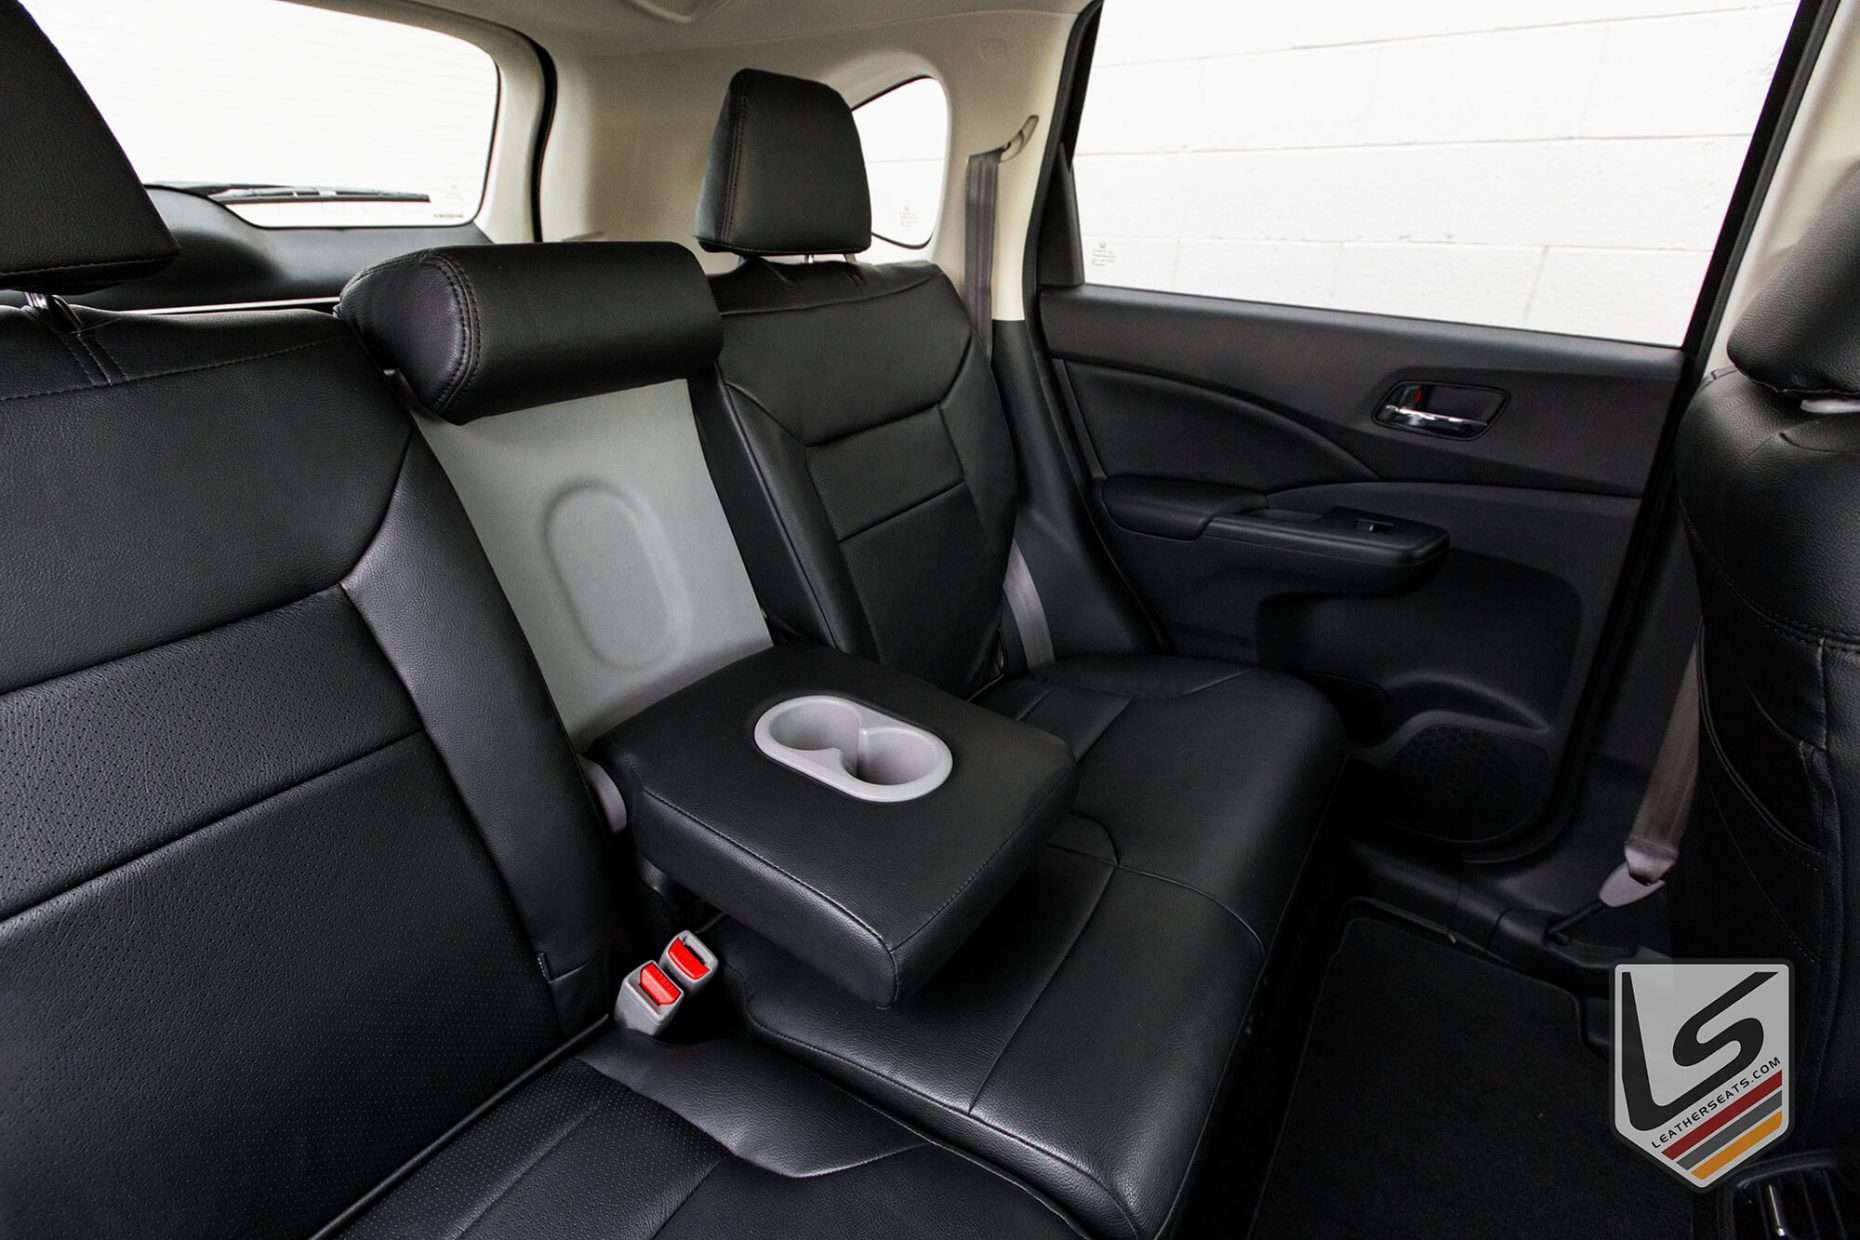 Rear seat leather armrest fold down